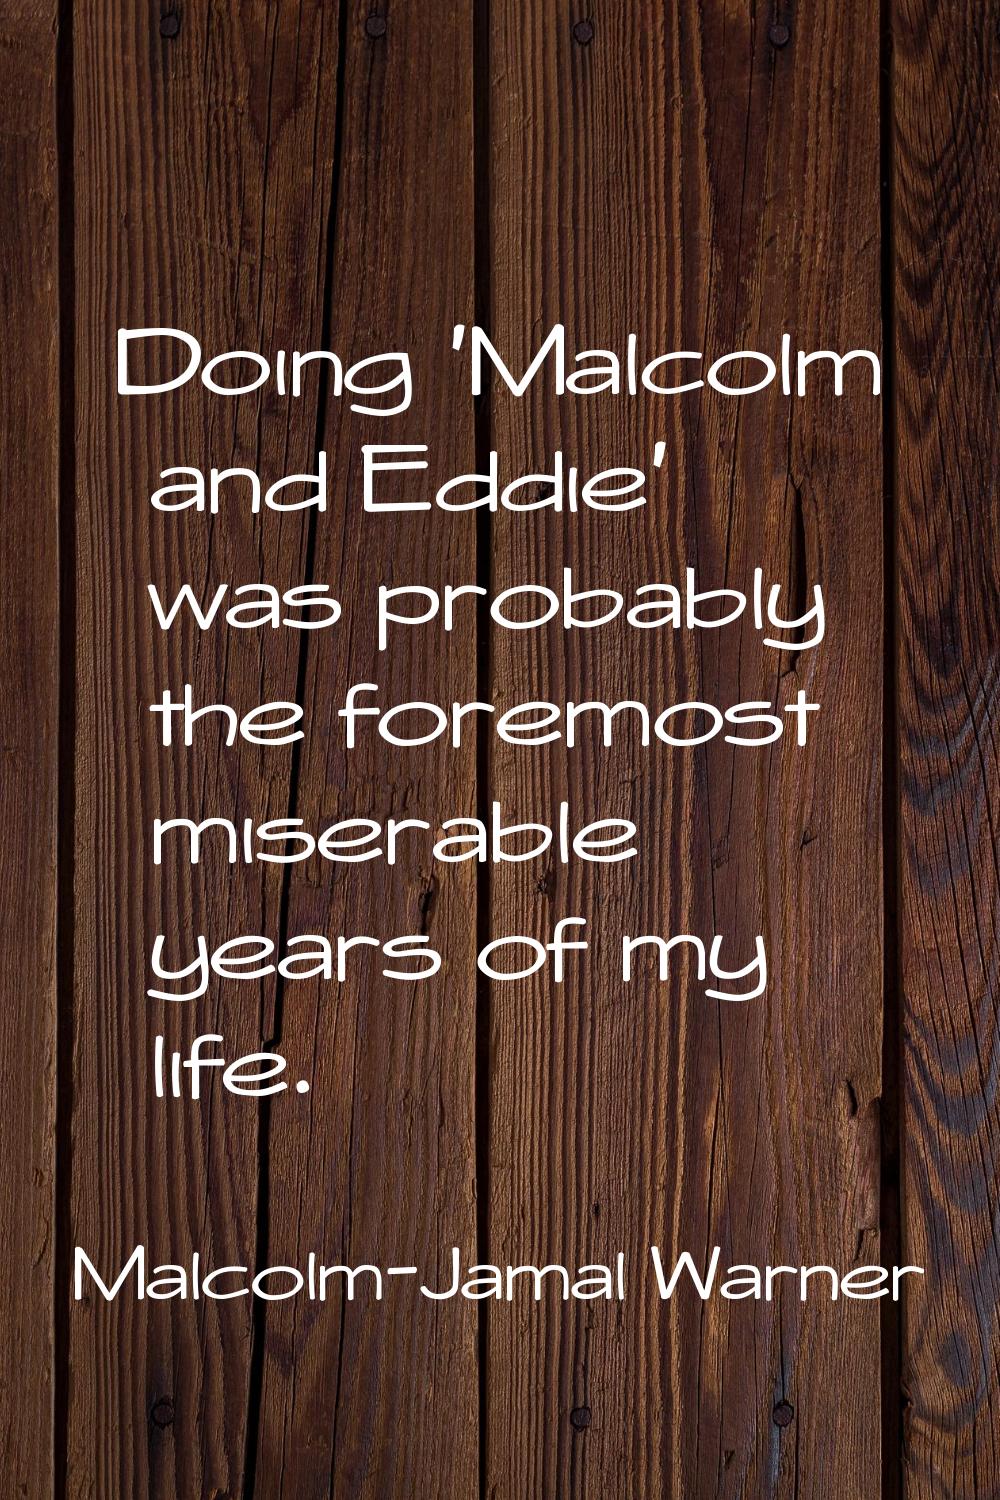 Doing 'Malcolm and Eddie' was probably the foremost miserable years of my life.